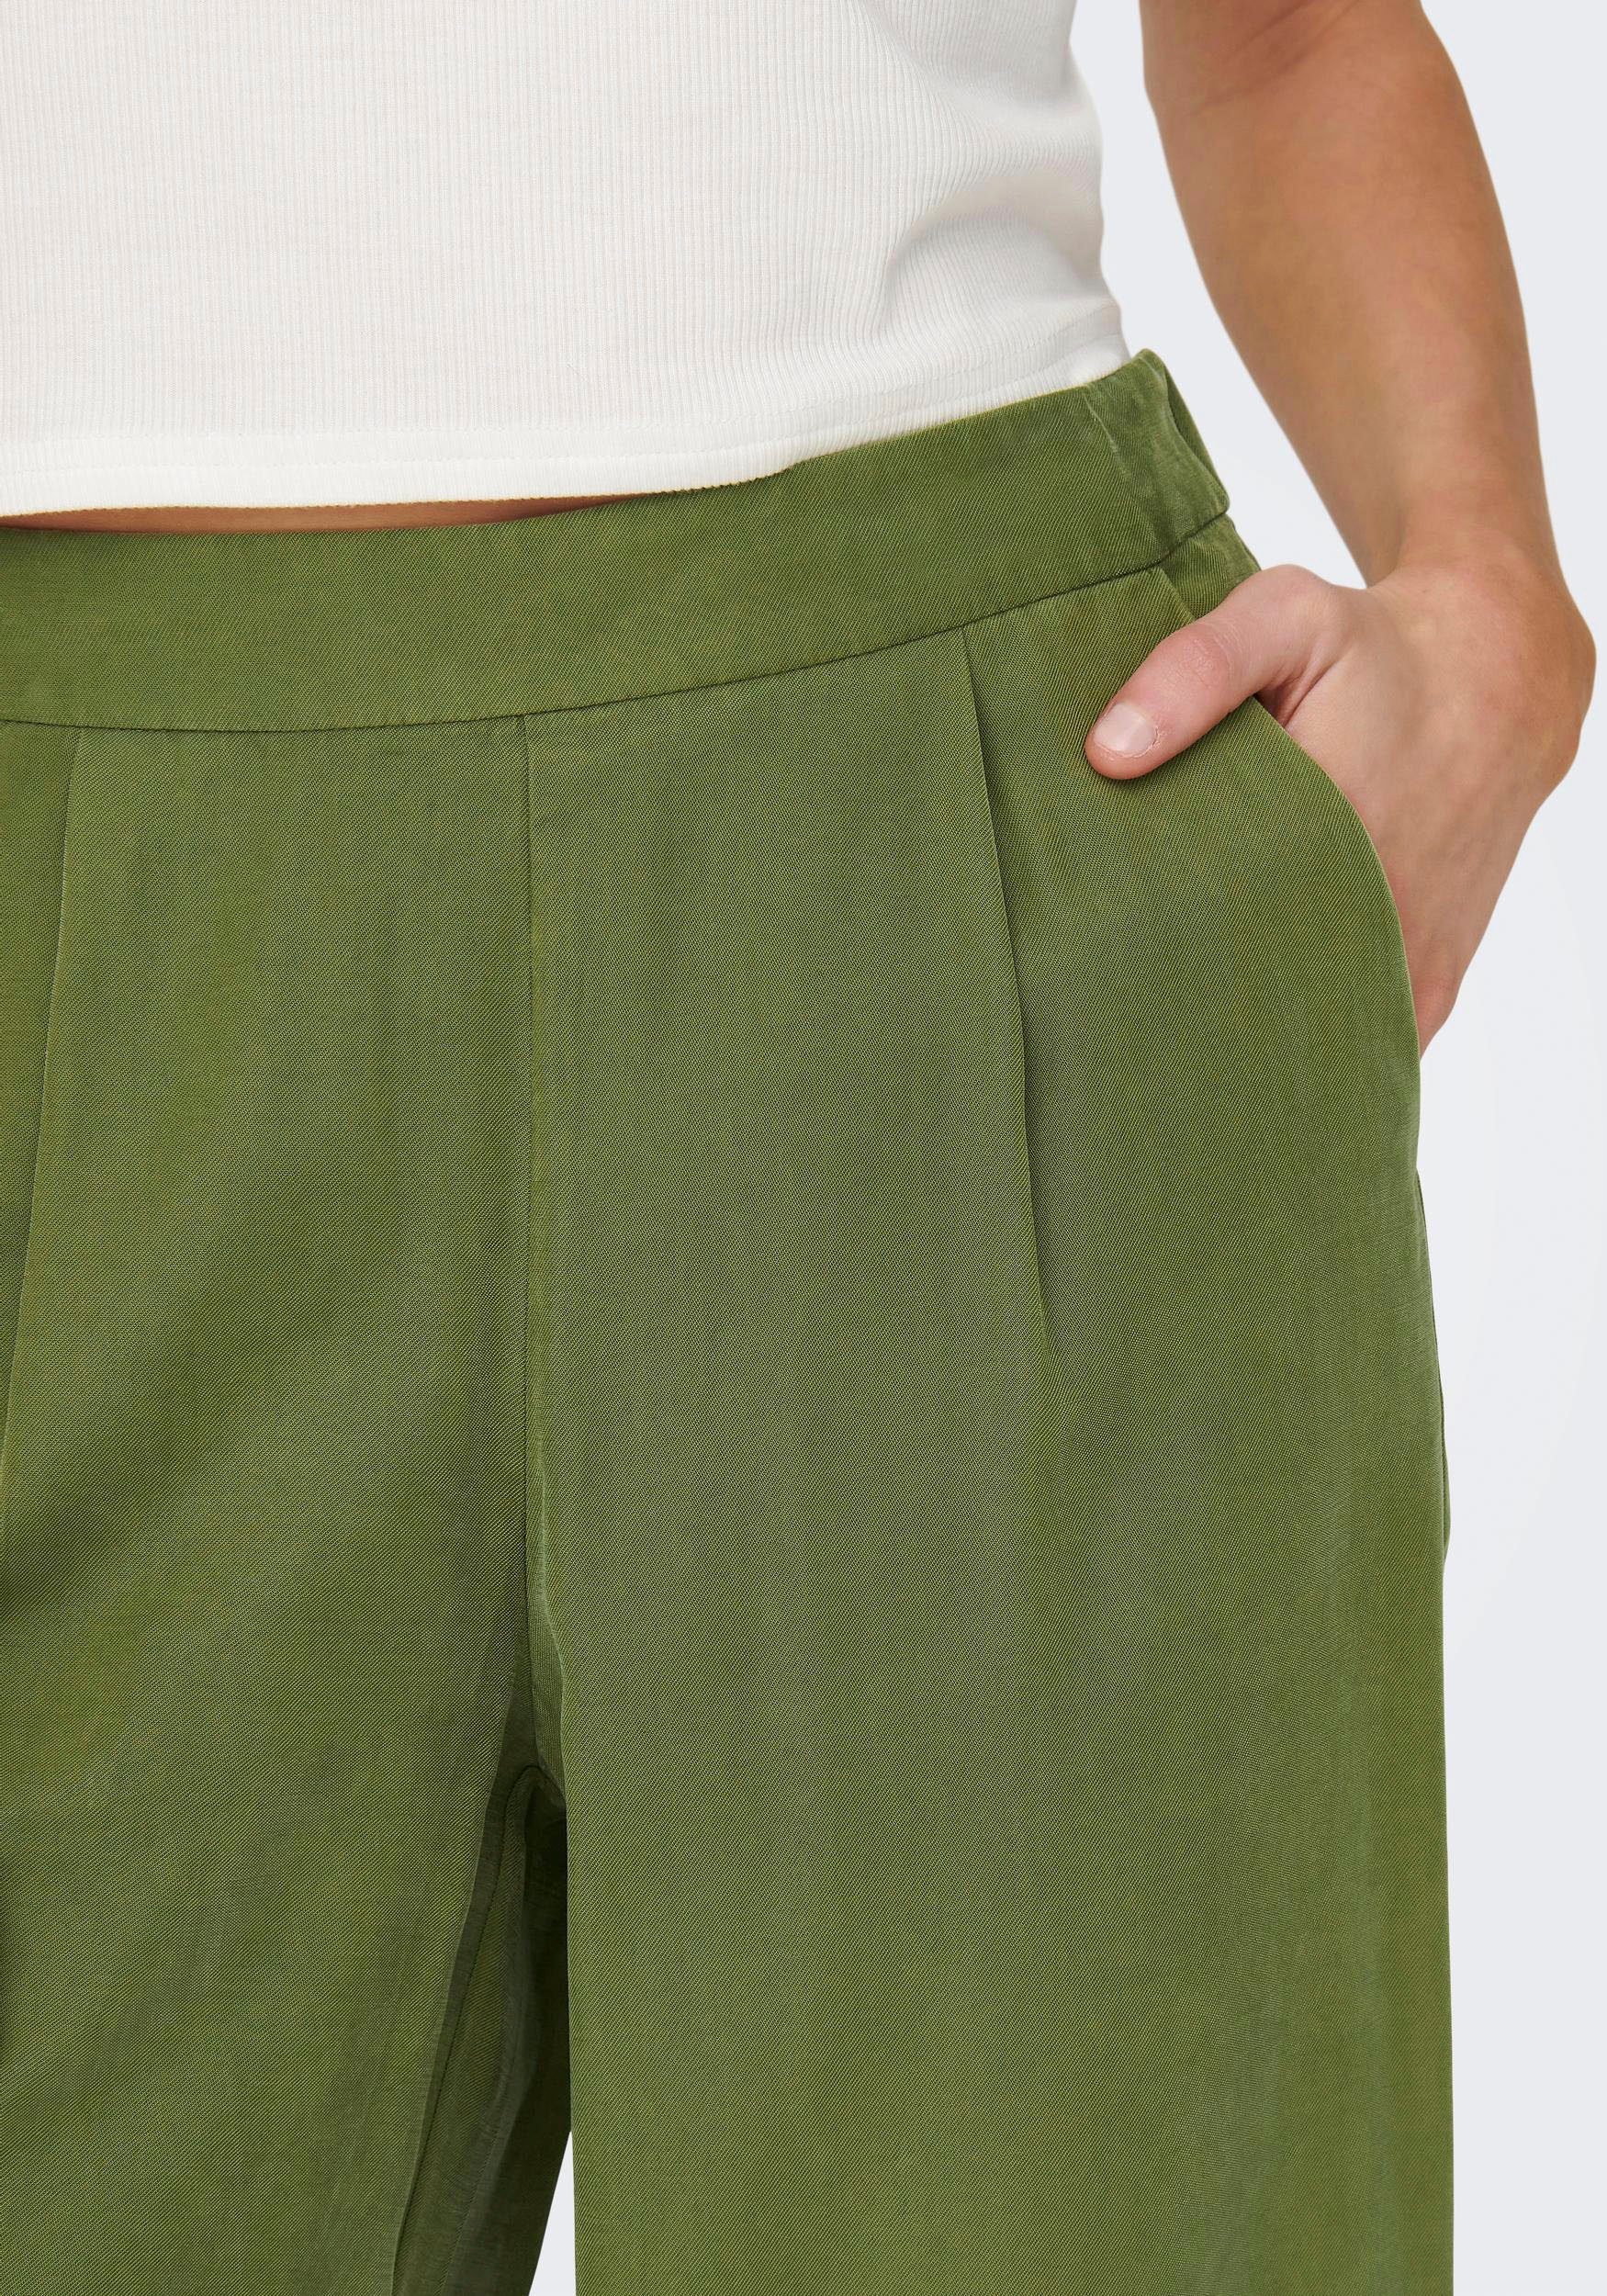 ONLCARISA-MAGO PANT Olive ONLY Culotte Branch 187101 LIFE CULOTTE PNT